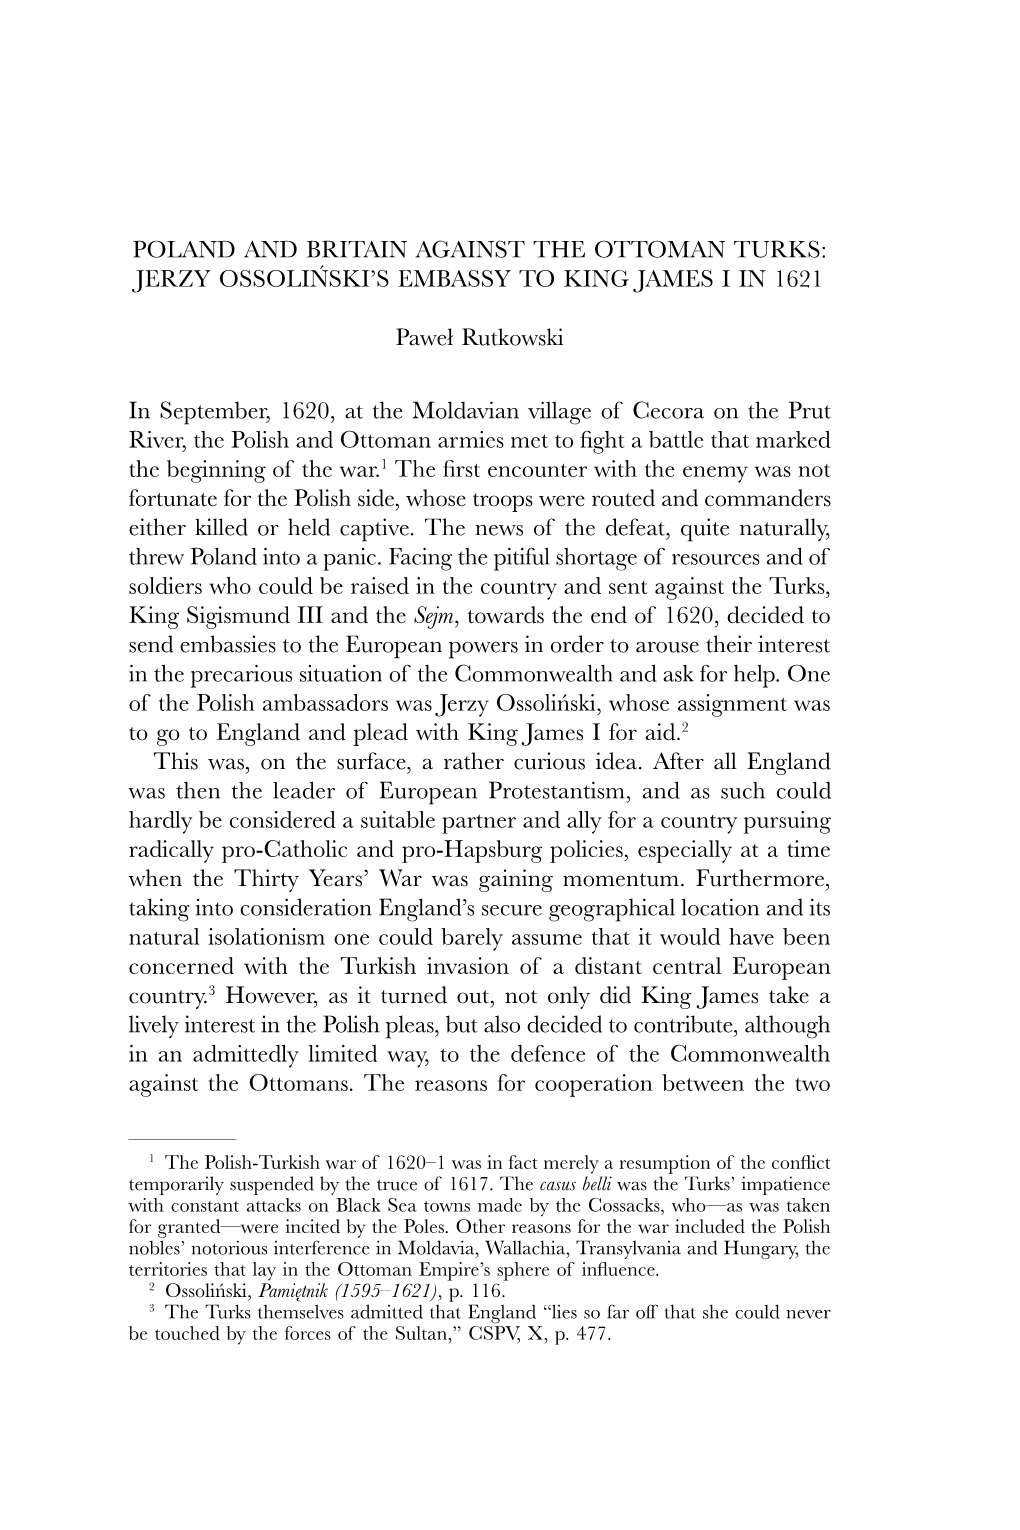 Poland and Britain Against the Ottoman Turks: Jerzy Ossoli^Nski’S Embassy to King James I in 1621